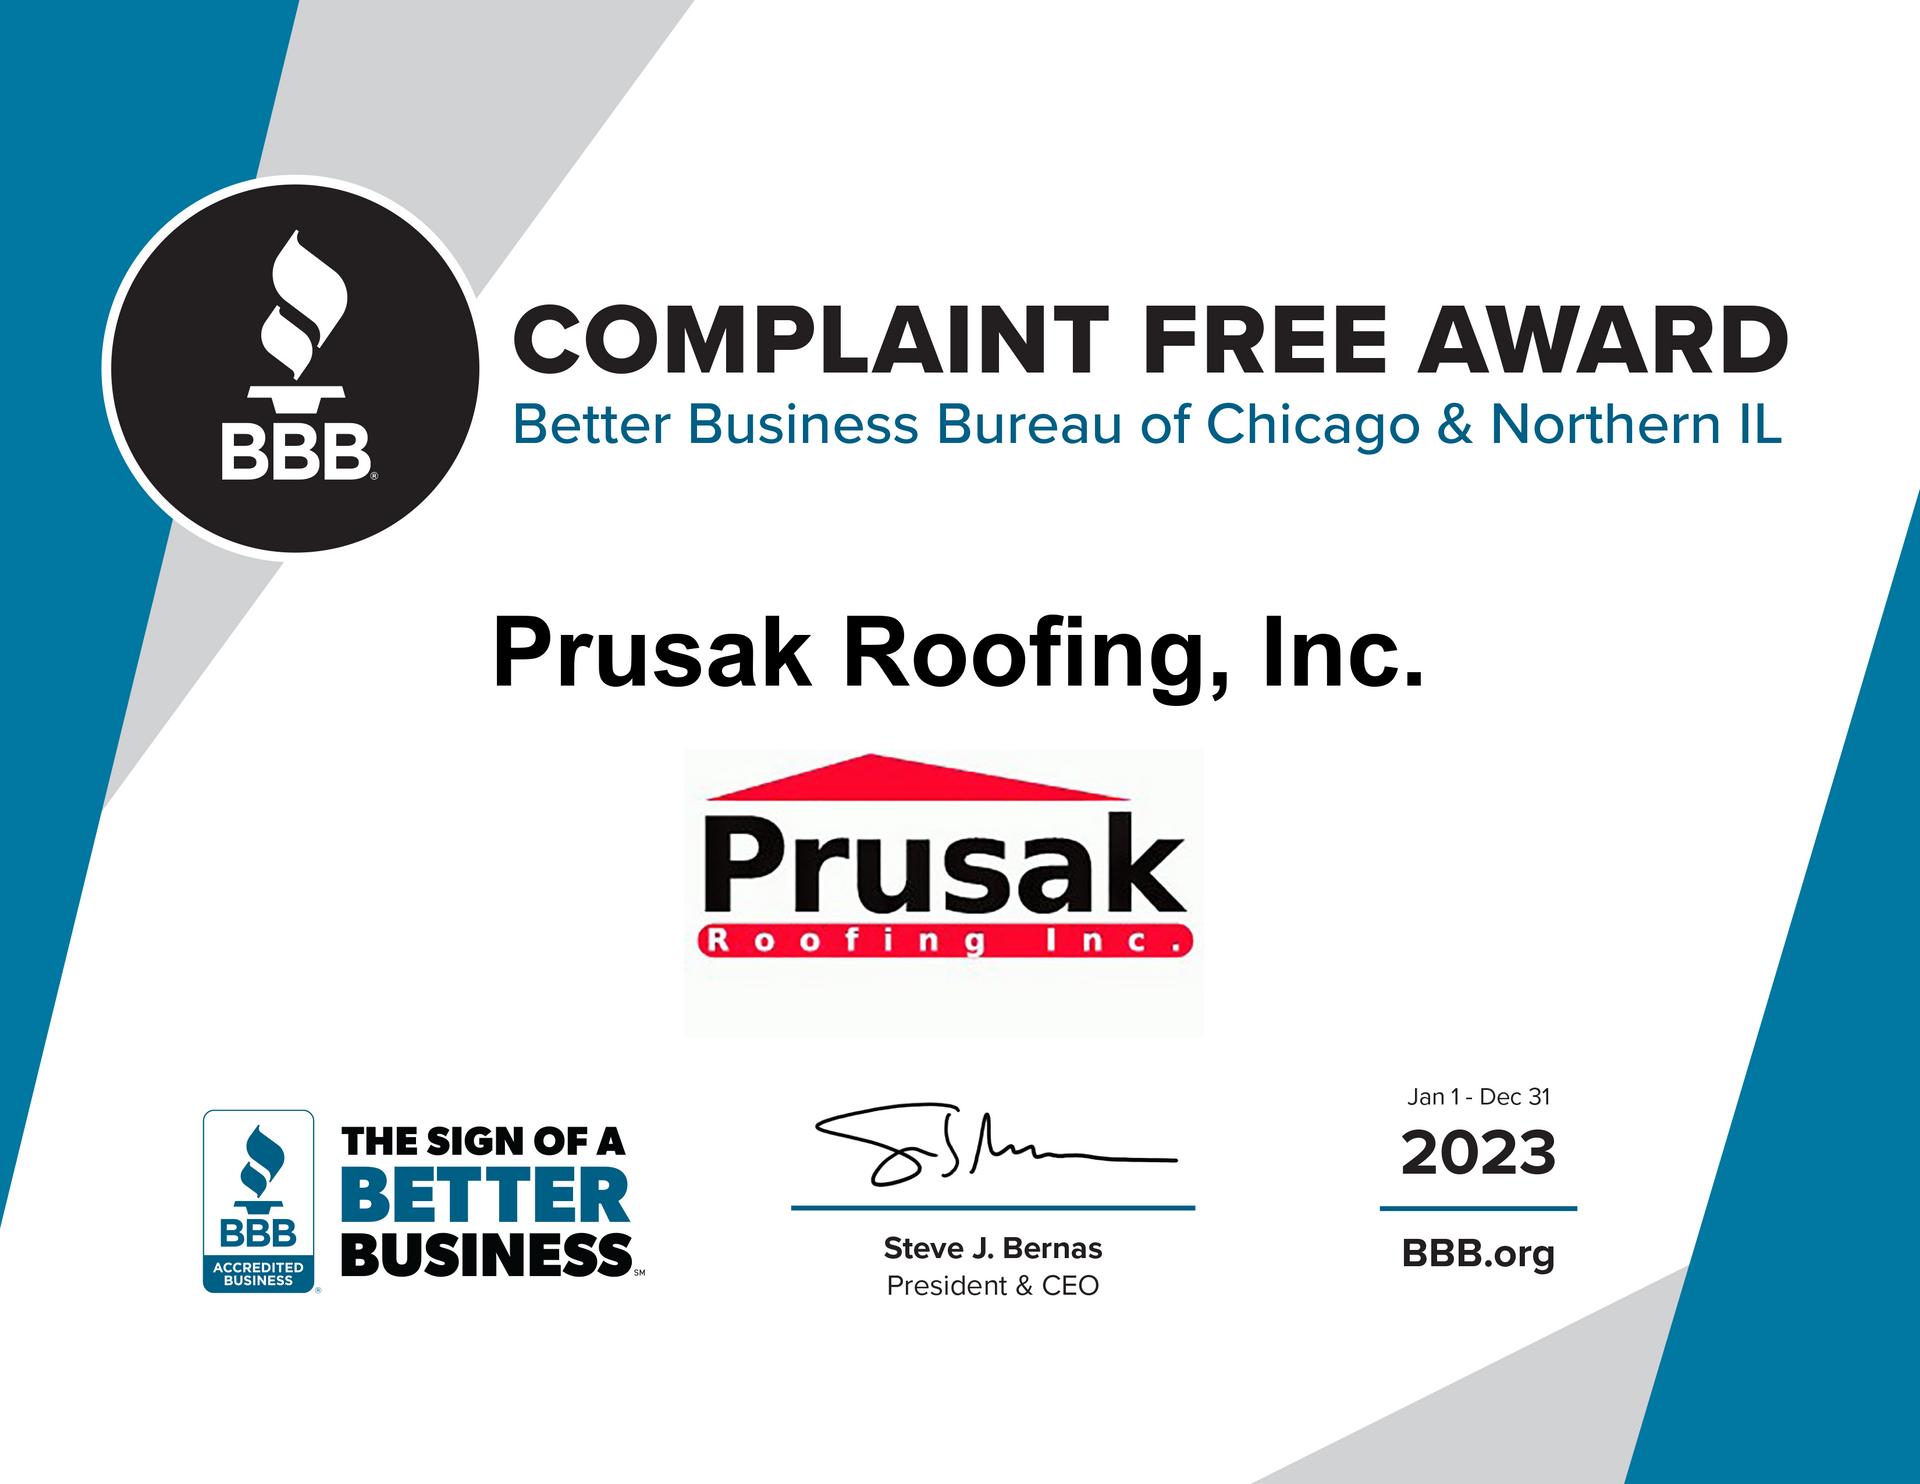 A complaint free award from the better business bureau of chicago and northern il